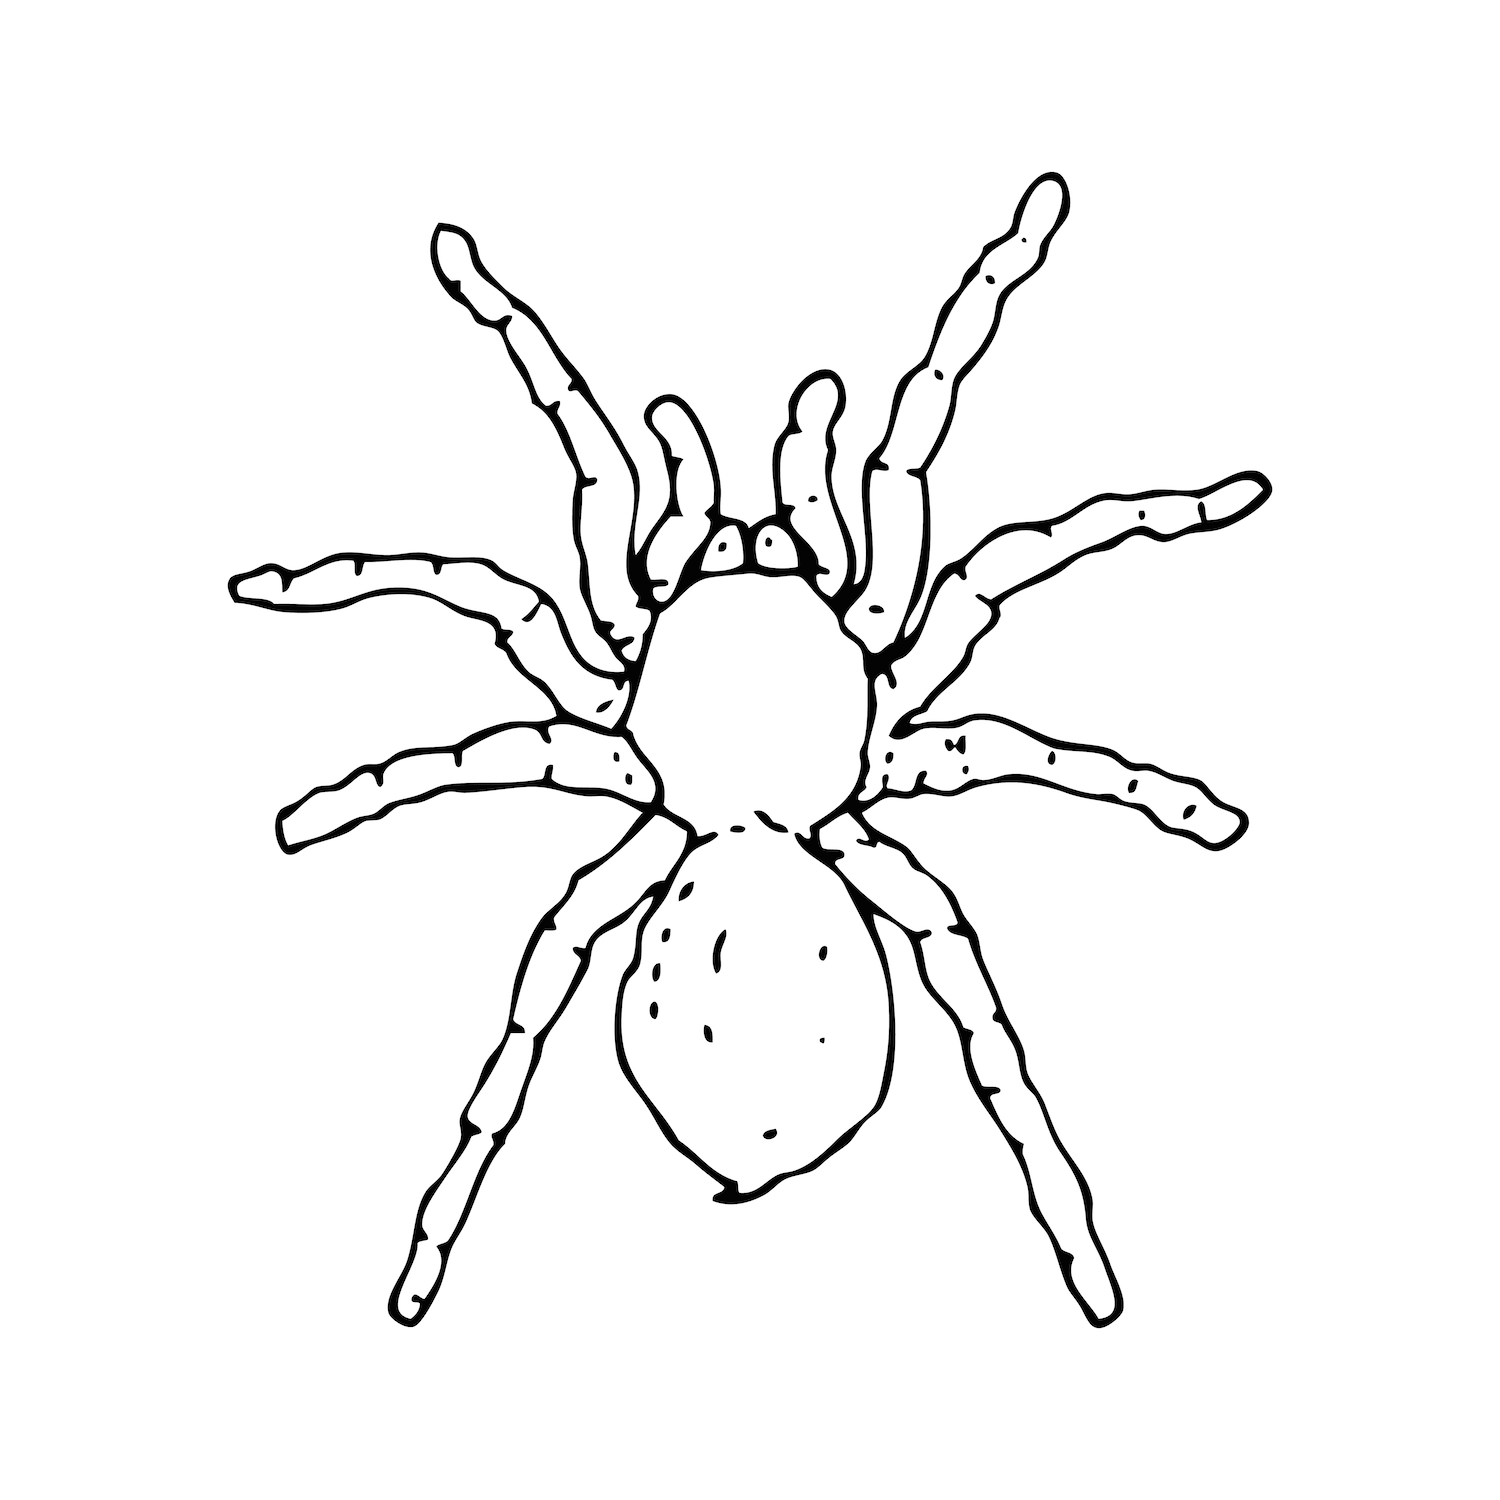 How To Draw A Tarantula Step By Step Easy